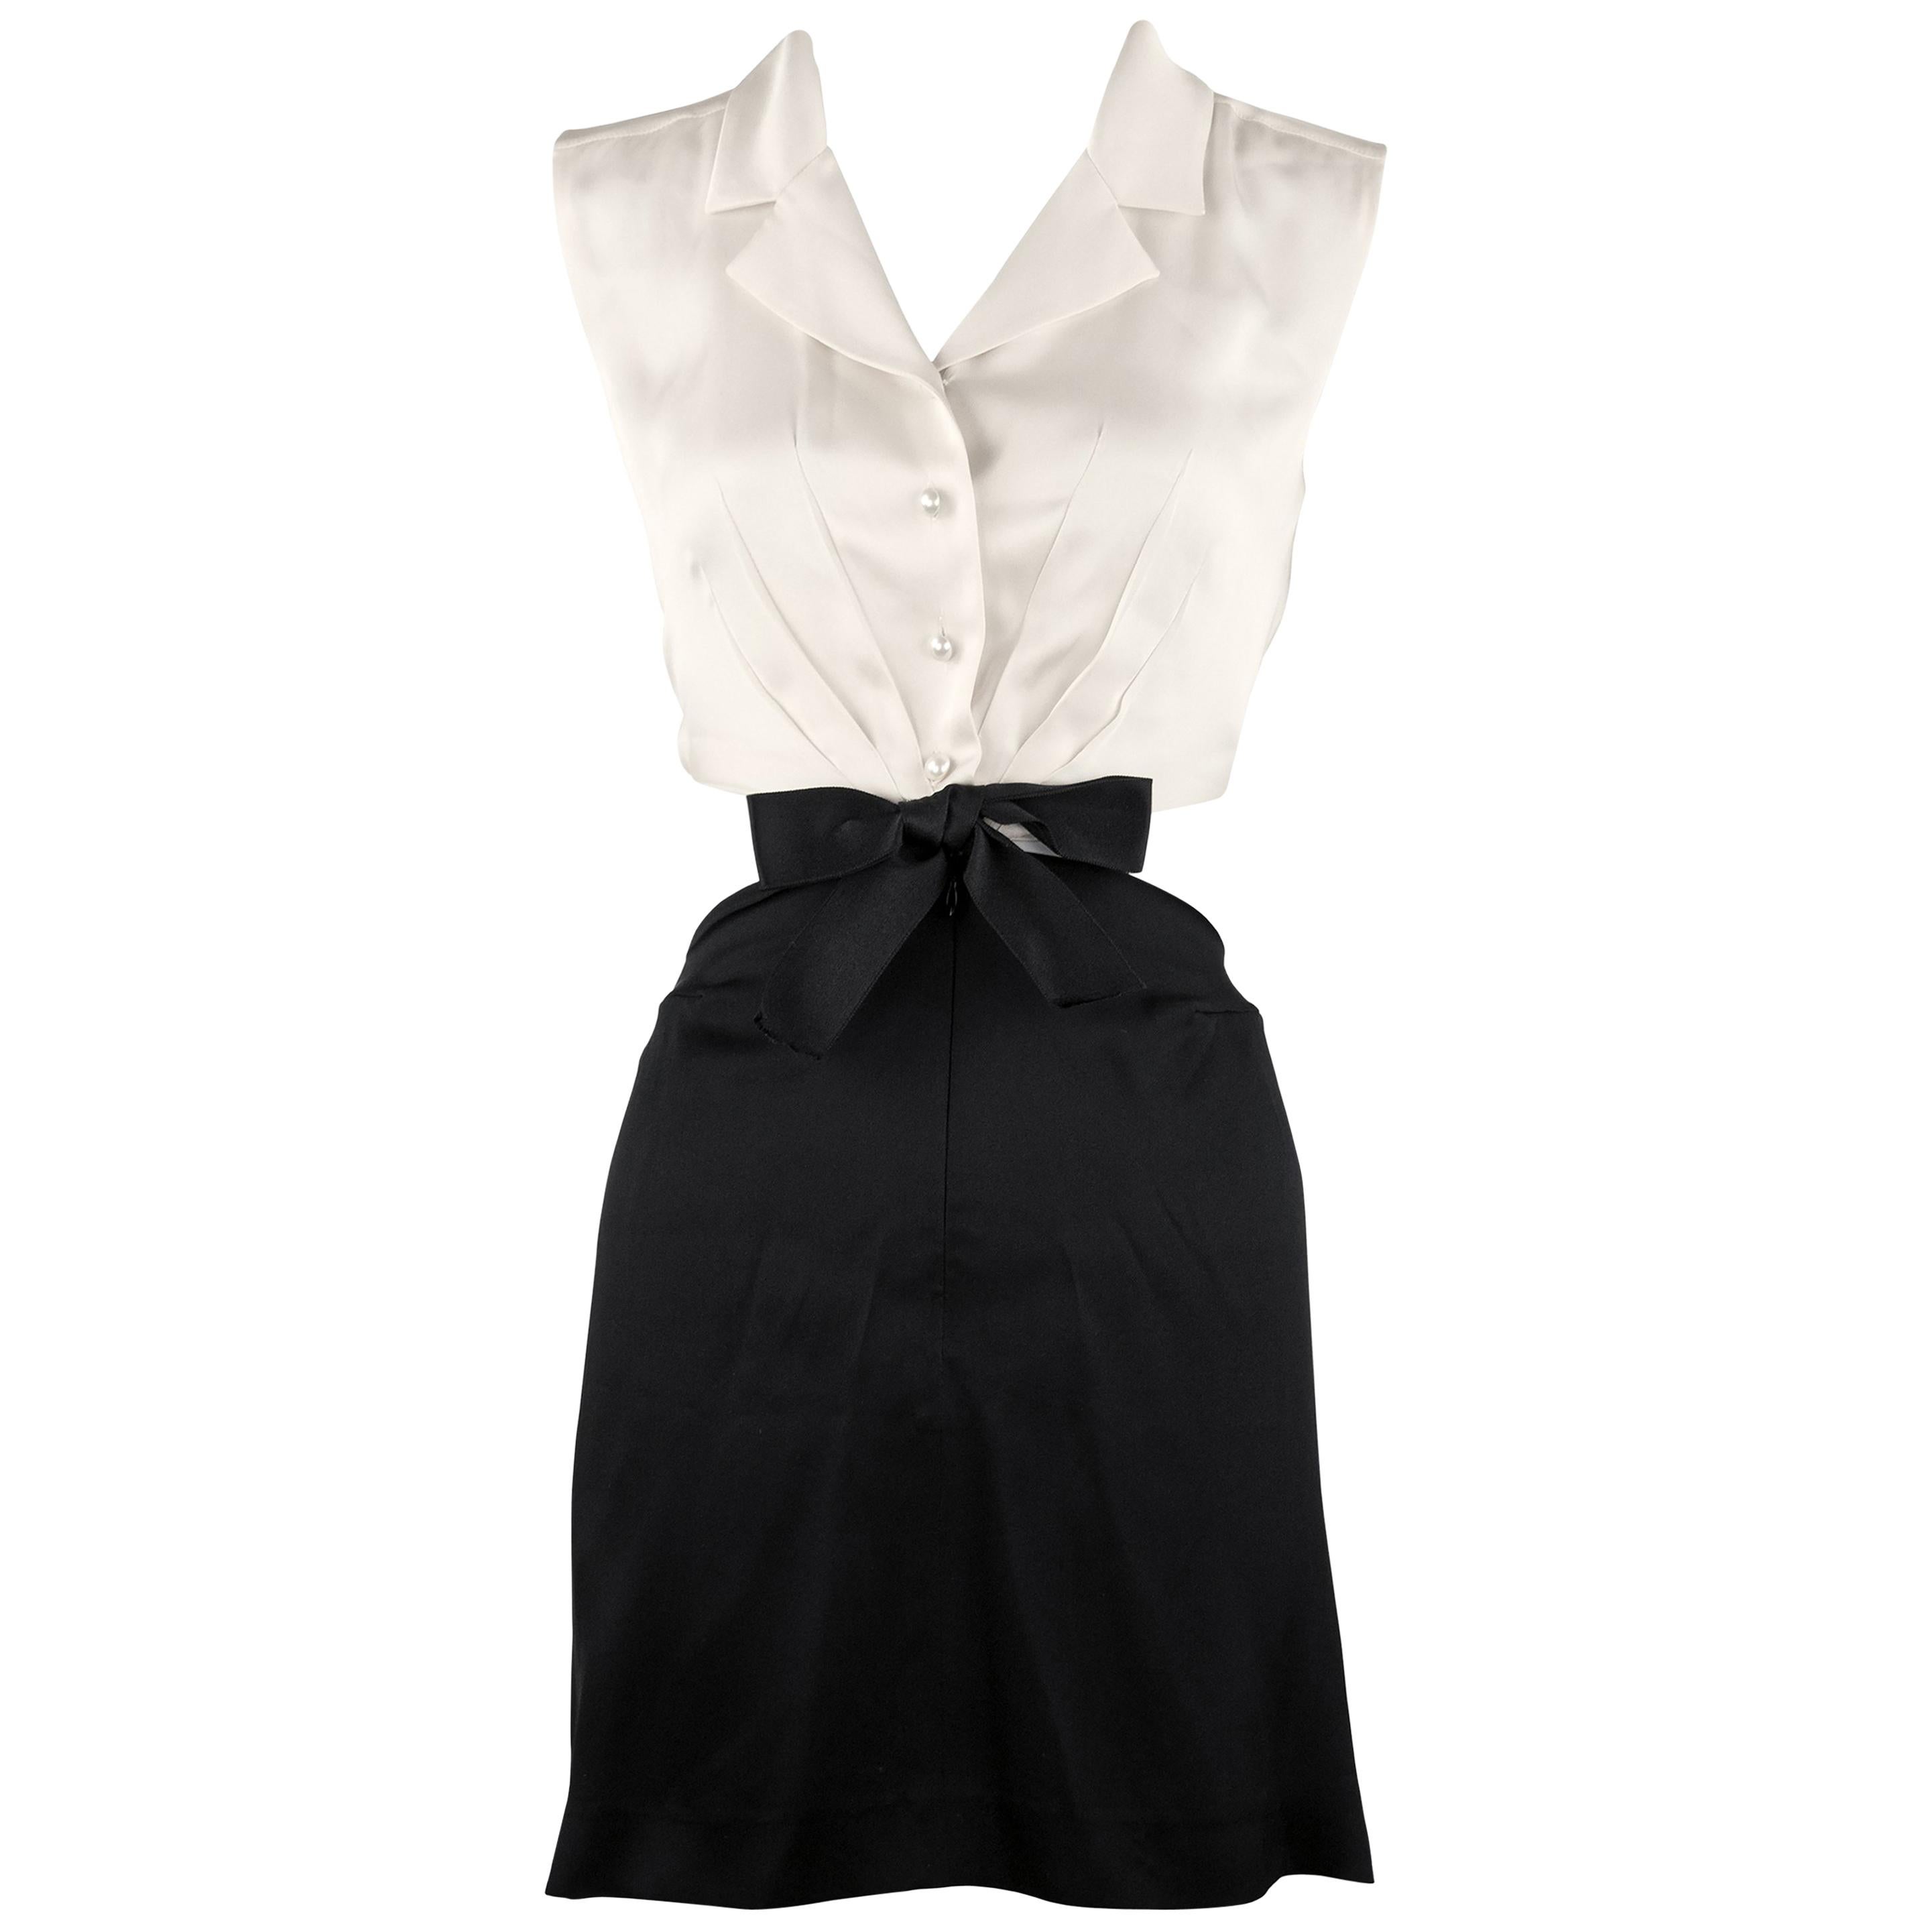 Chanel Vintage Silk Charmeuse Black and White Dress   For Sale